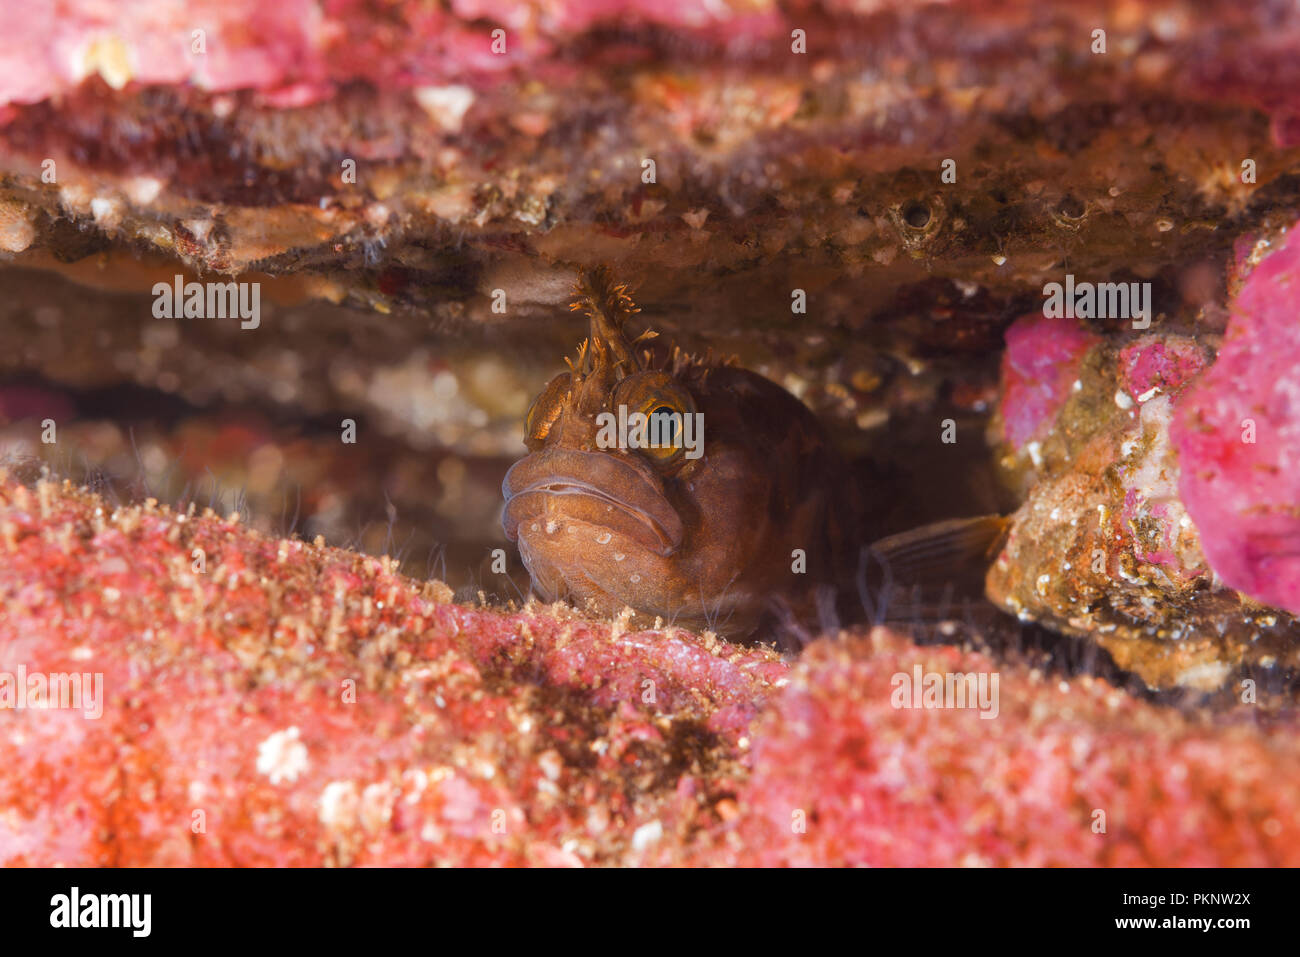 Yarrell's Blenny, Atlantic Warbonnet or Mosshead Warbonnet  (Chirolophis ascanii) hiding in the crevice of the reef Stock Photo